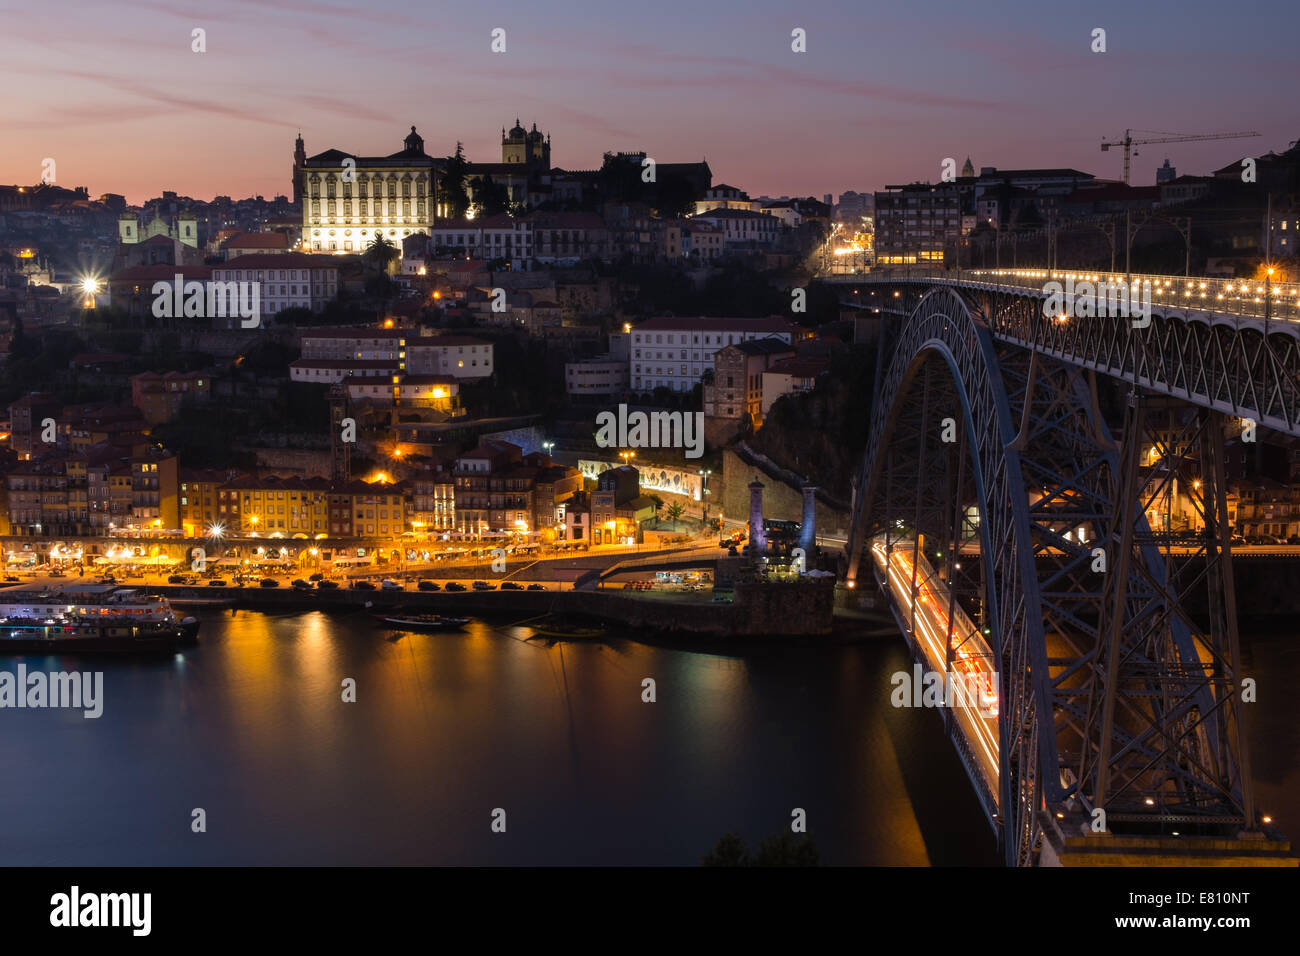 Early evening view of the Ribeira district, Oporto, Portugal with the Luiz I bridge spanning the Douro river. Stock Photo